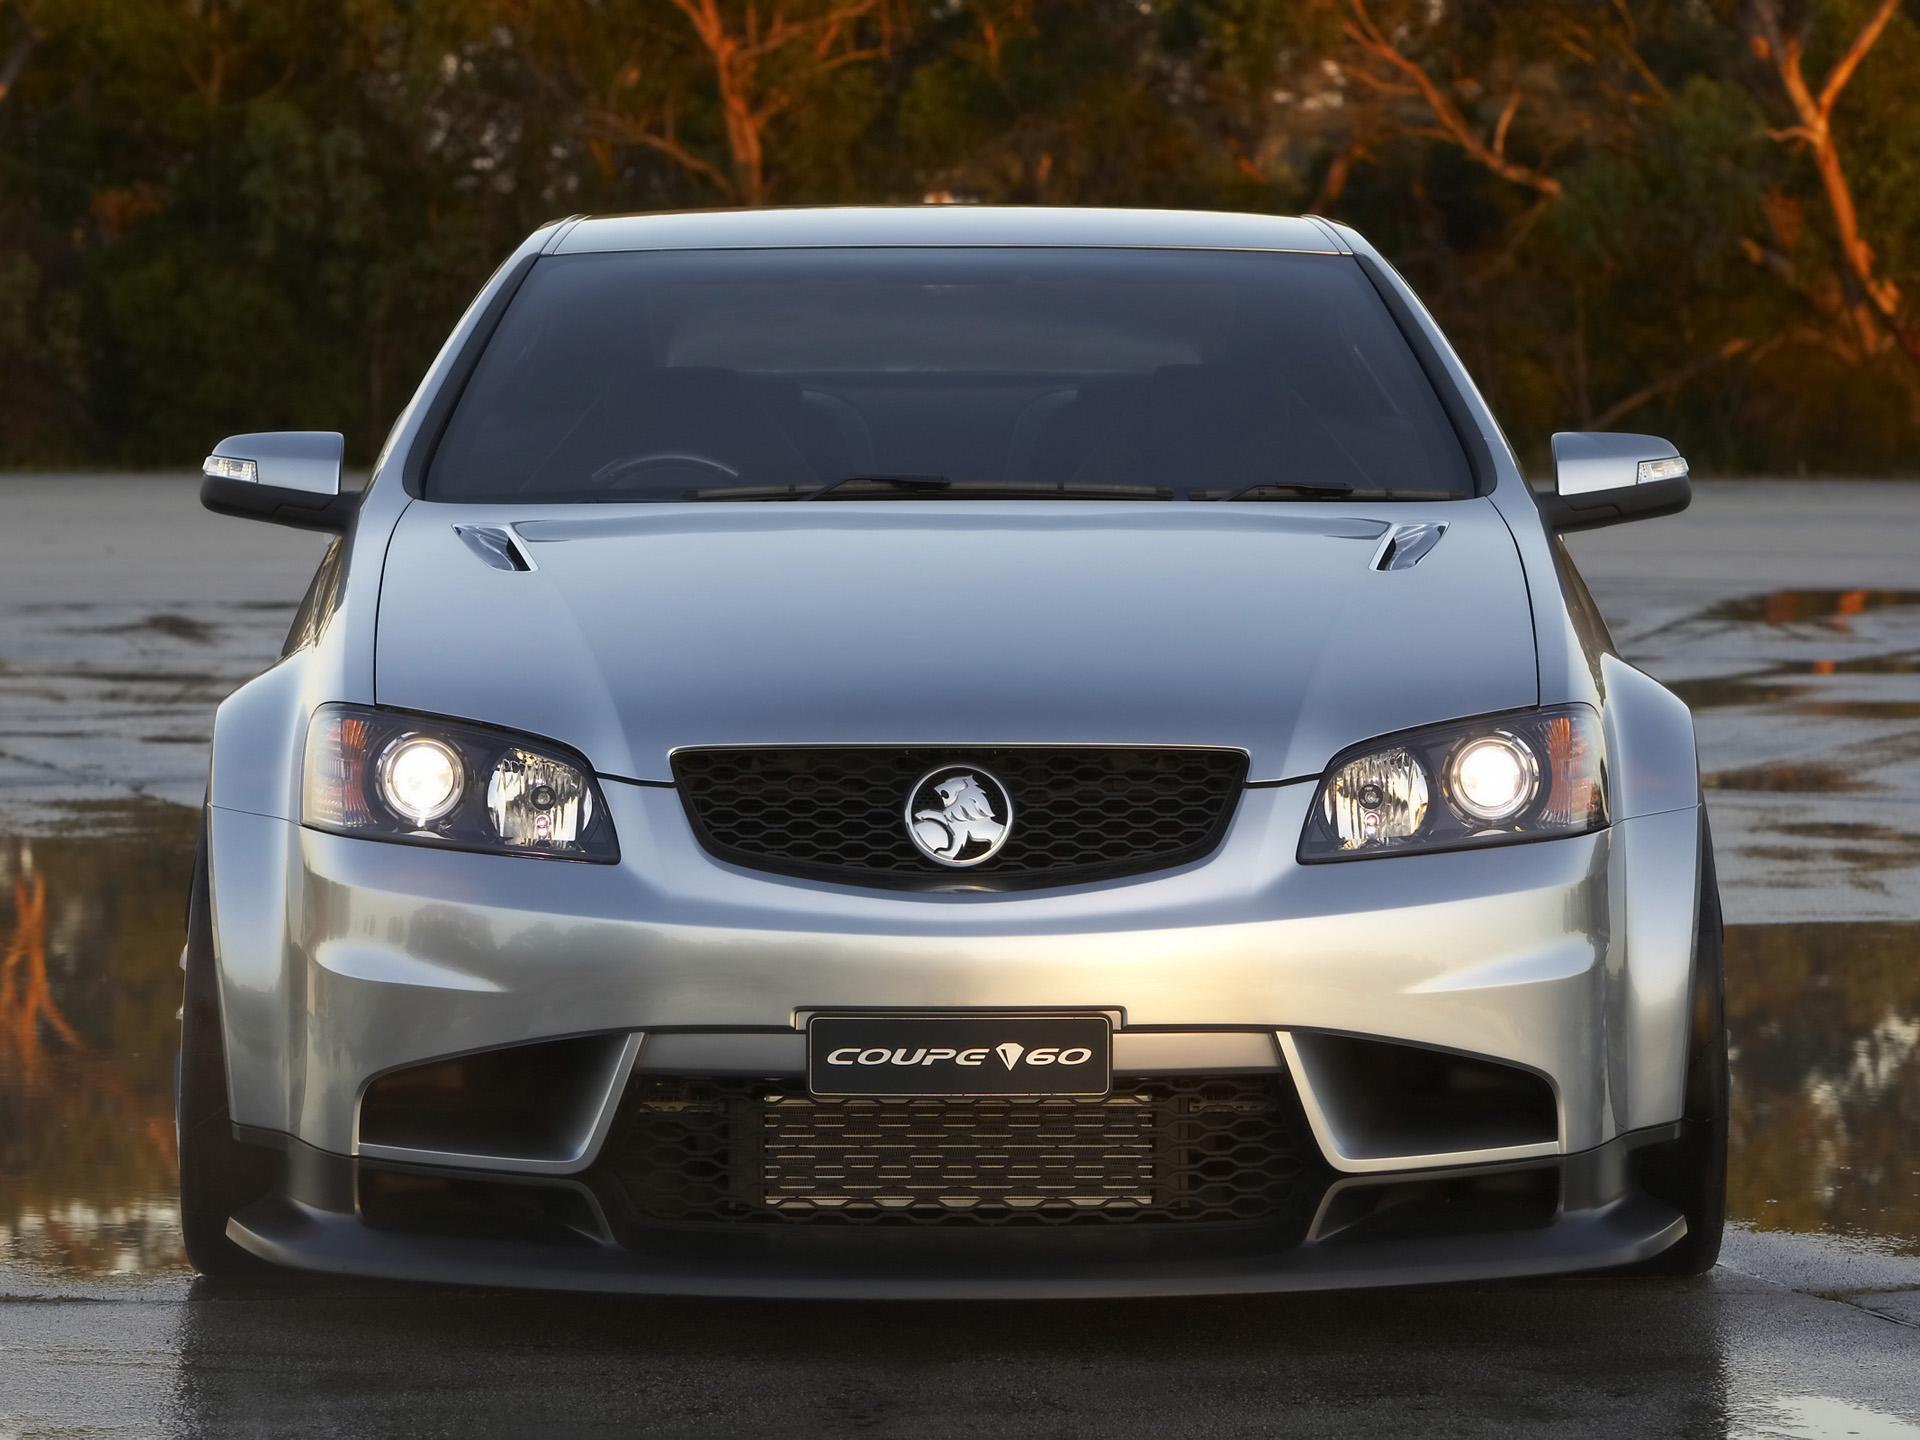 1920x1440 > Holden Coupe 60 Concept Wallpapers